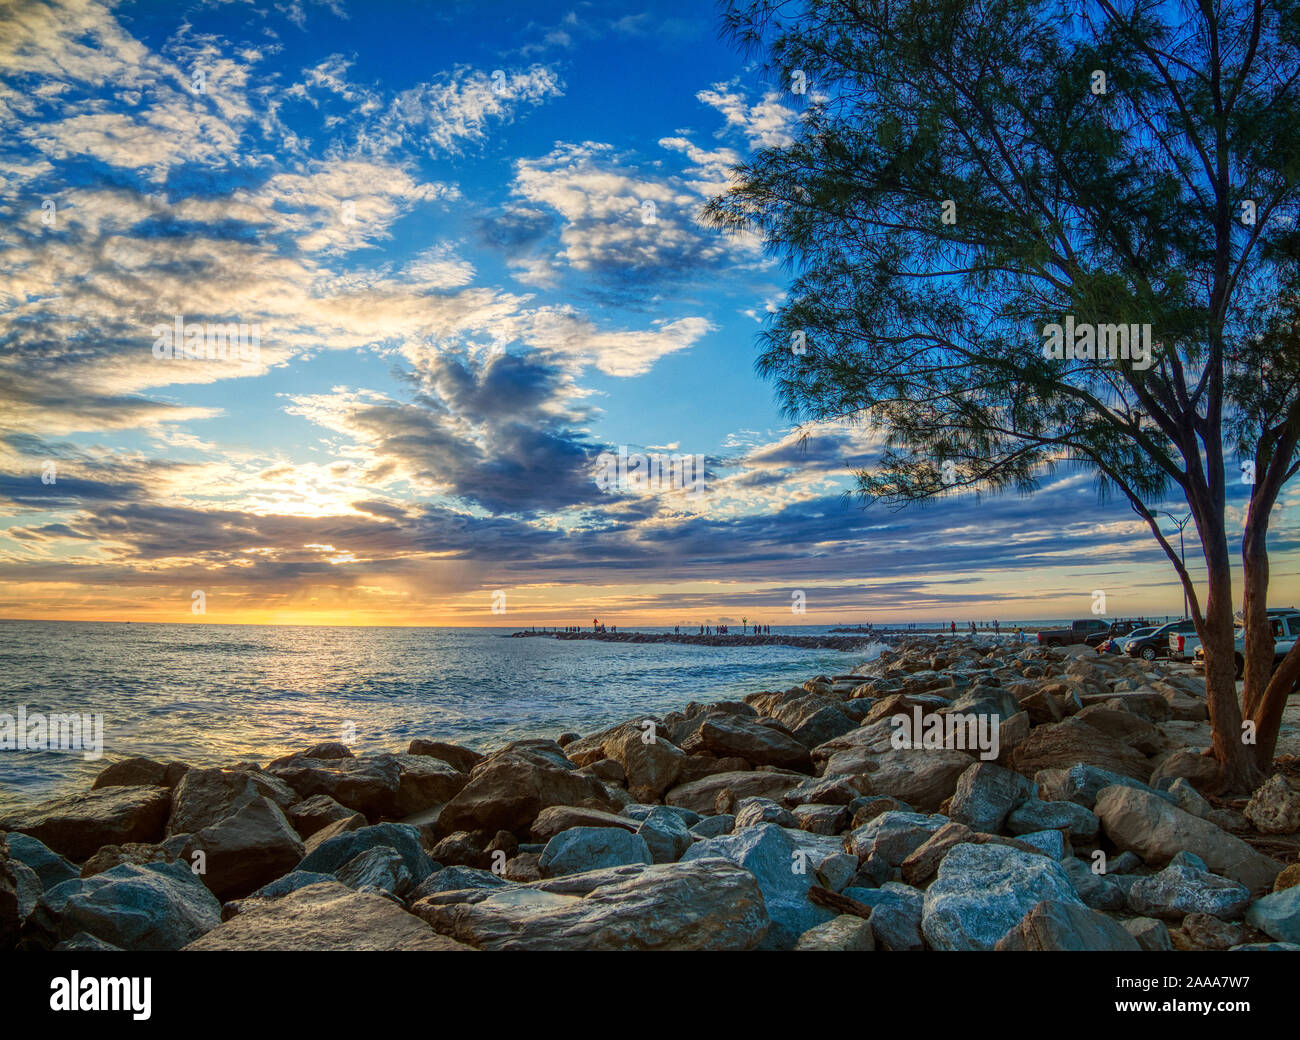 Sunset over Gulf of Mexico at the South Jetty in Venice Florida Stock Photo